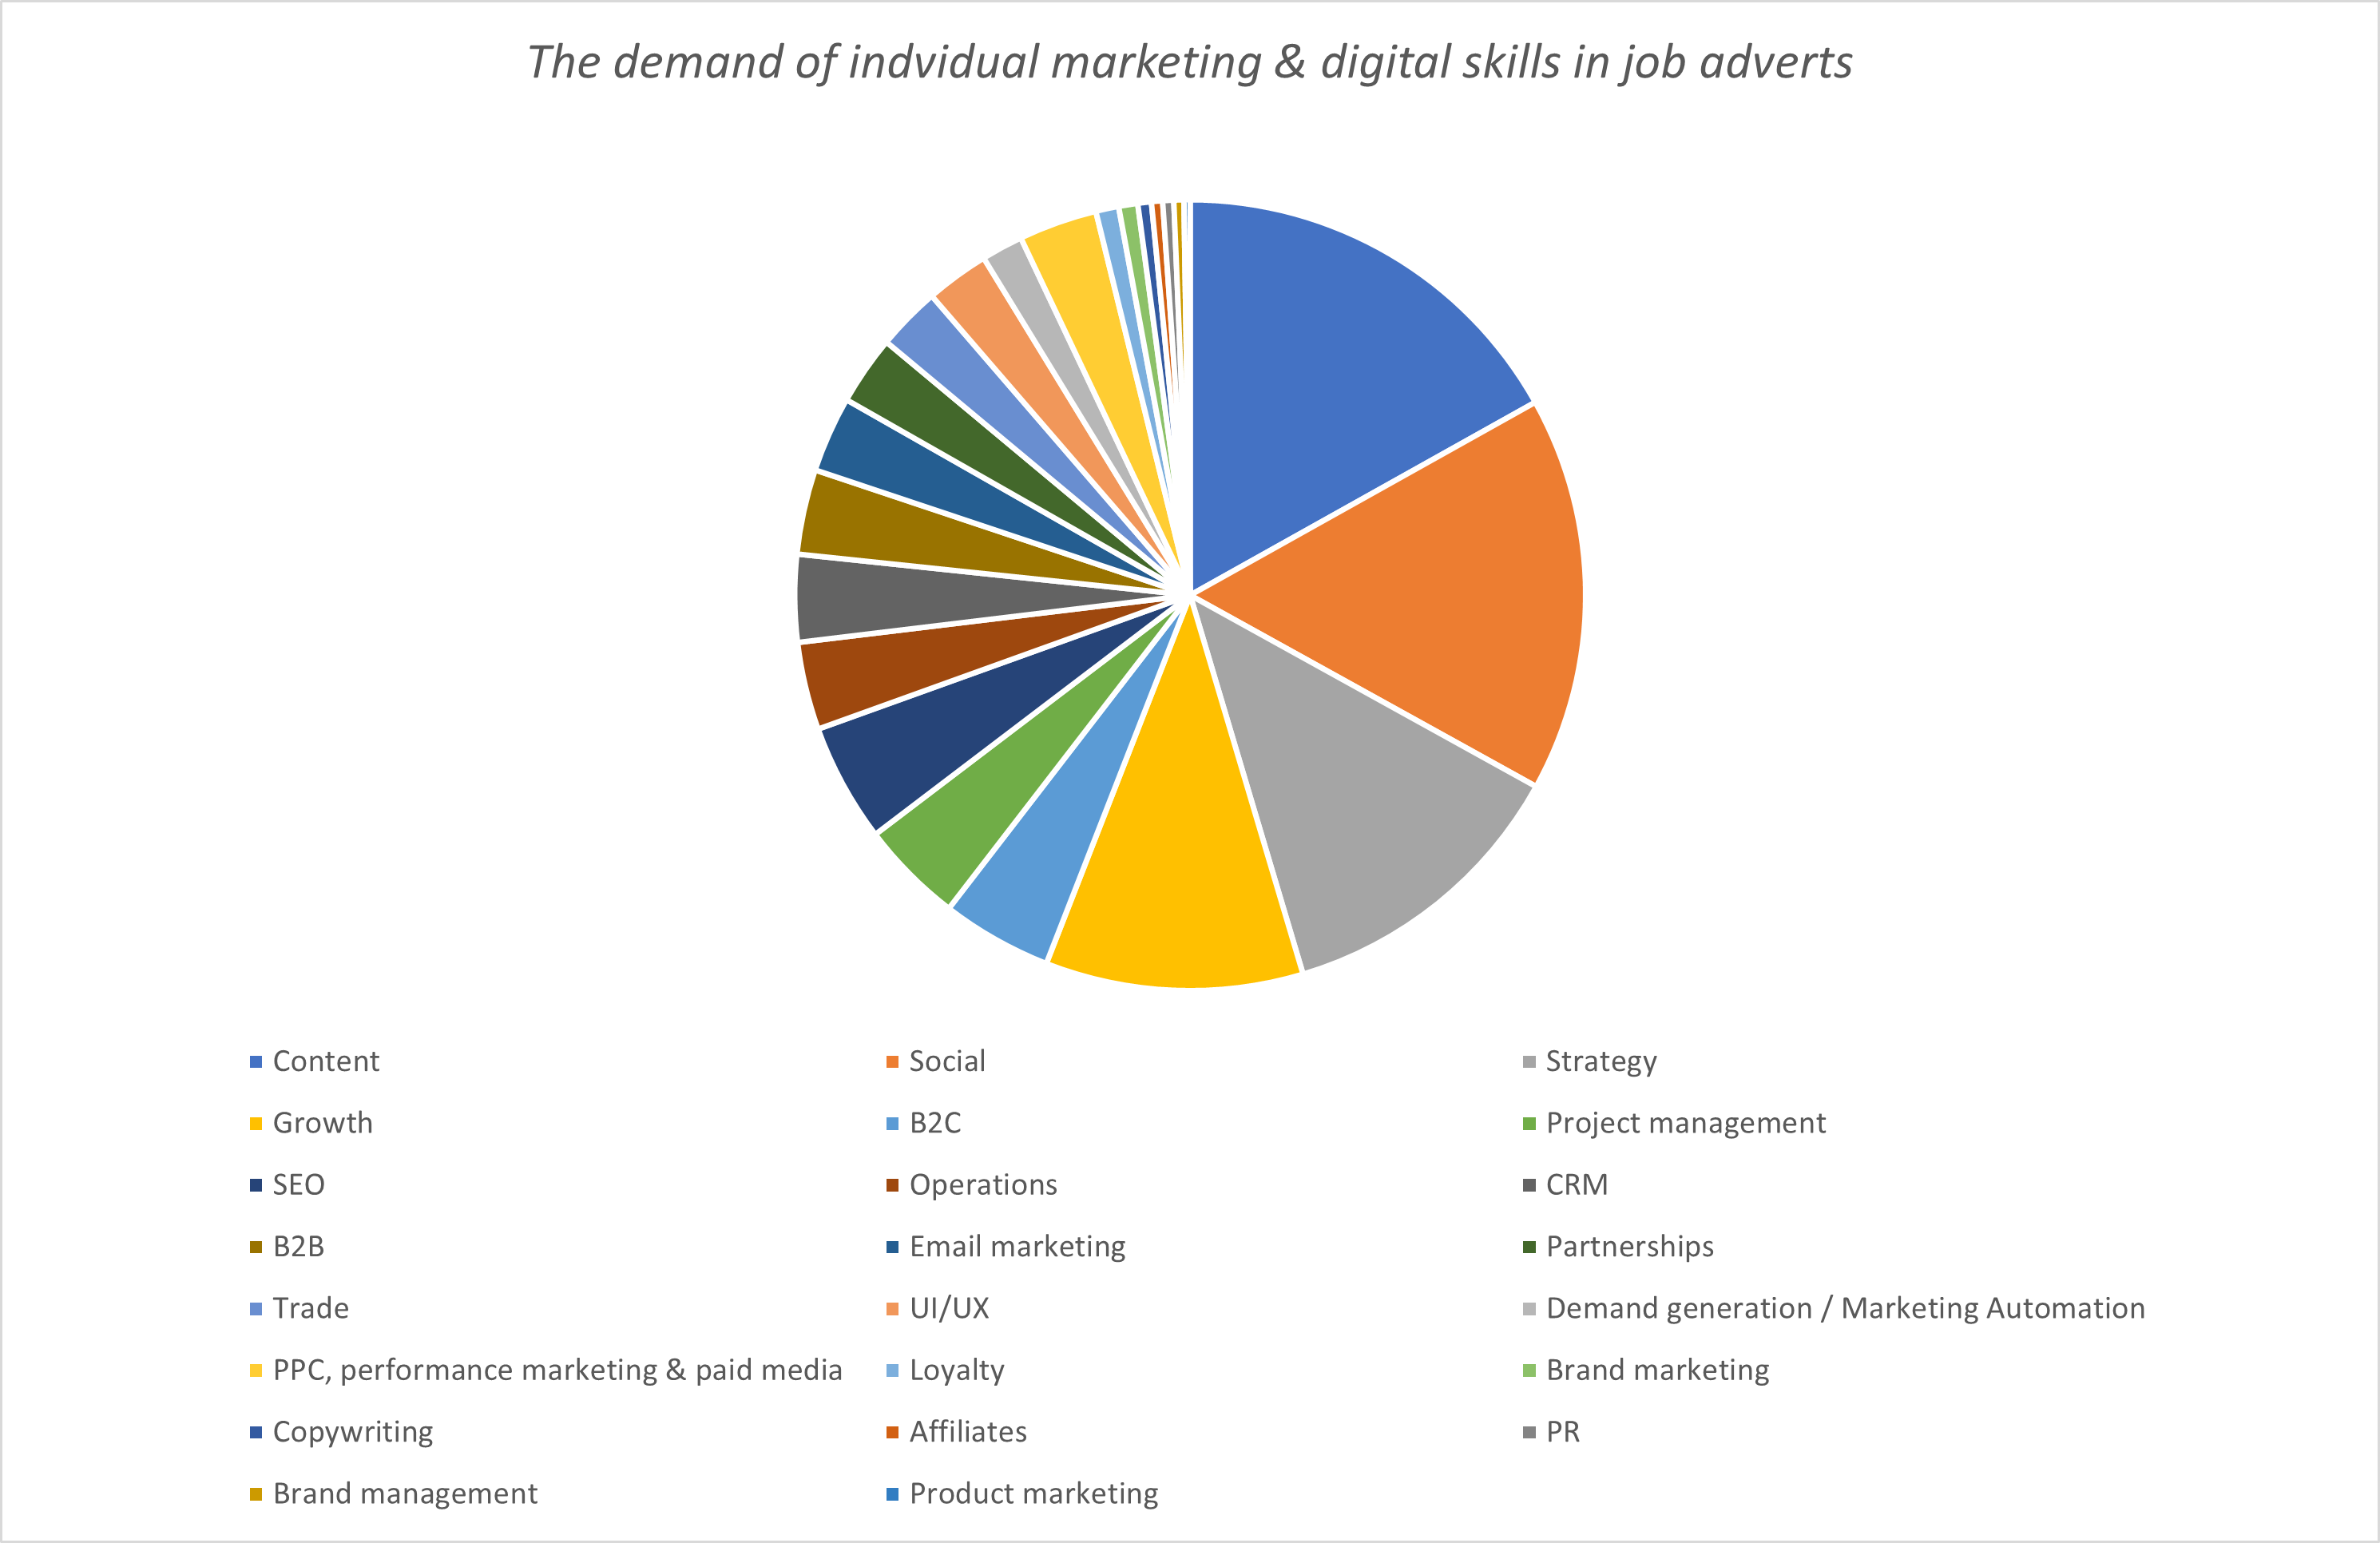 Image of graph displaying the demand for marketing talent by skill